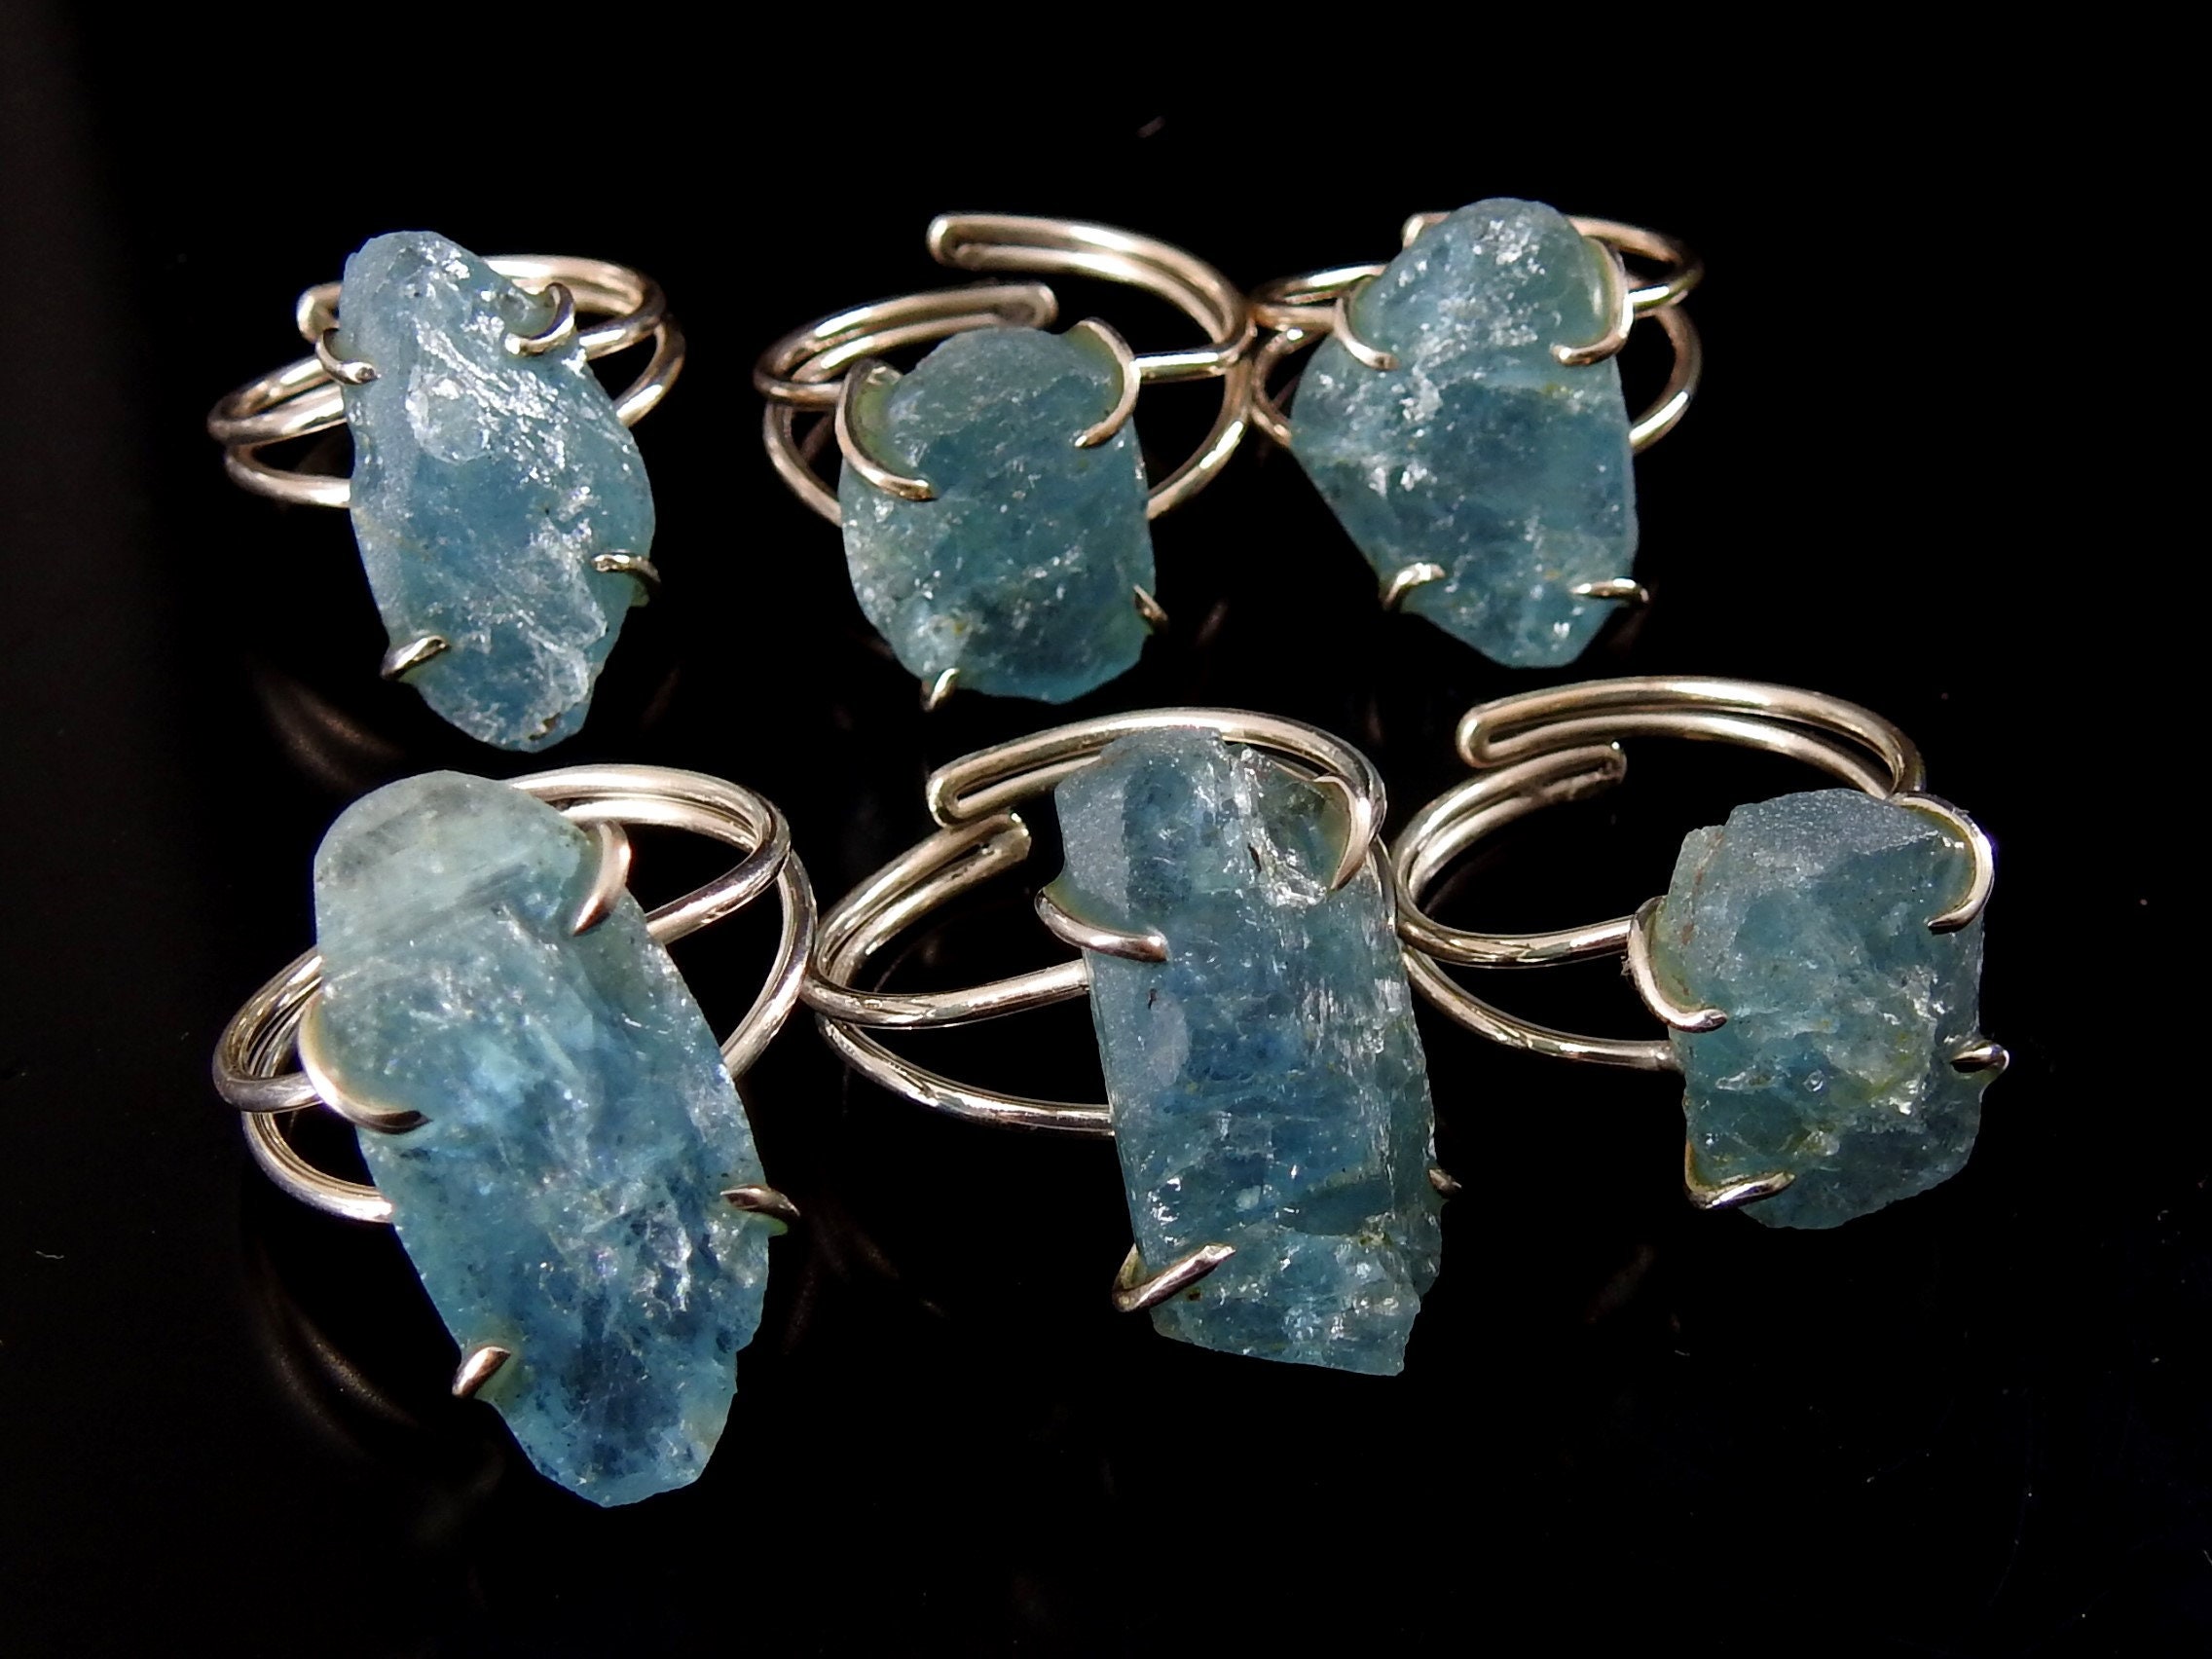 Aquamarine Natural Rough Rings/925 Sterling Silver Jewelry/Adjustable/Loose Raw/Wire-Wrapped/Minerals Stone/One Of A Kind/20-22MM Long/CJ-1 | Save 33% - Rajasthan Living 16